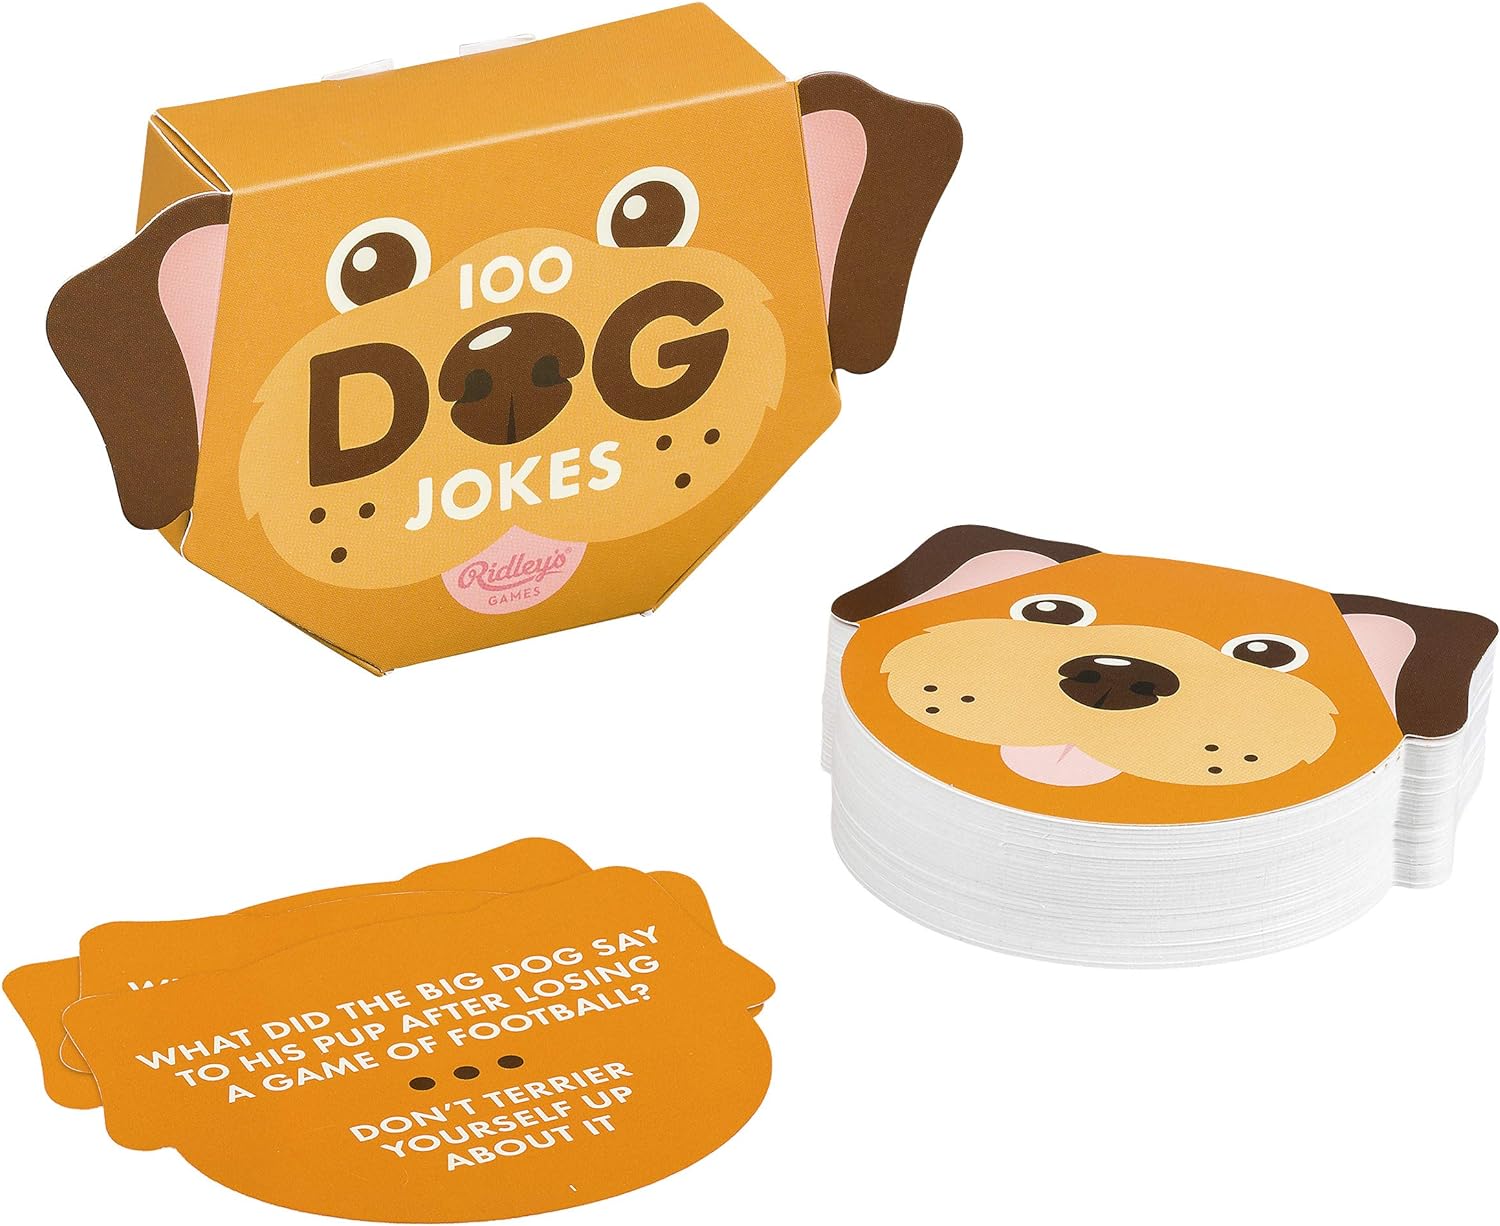 Ridley’s Dog Joke Cards – Includes 100 Jokes for Kids and Adults